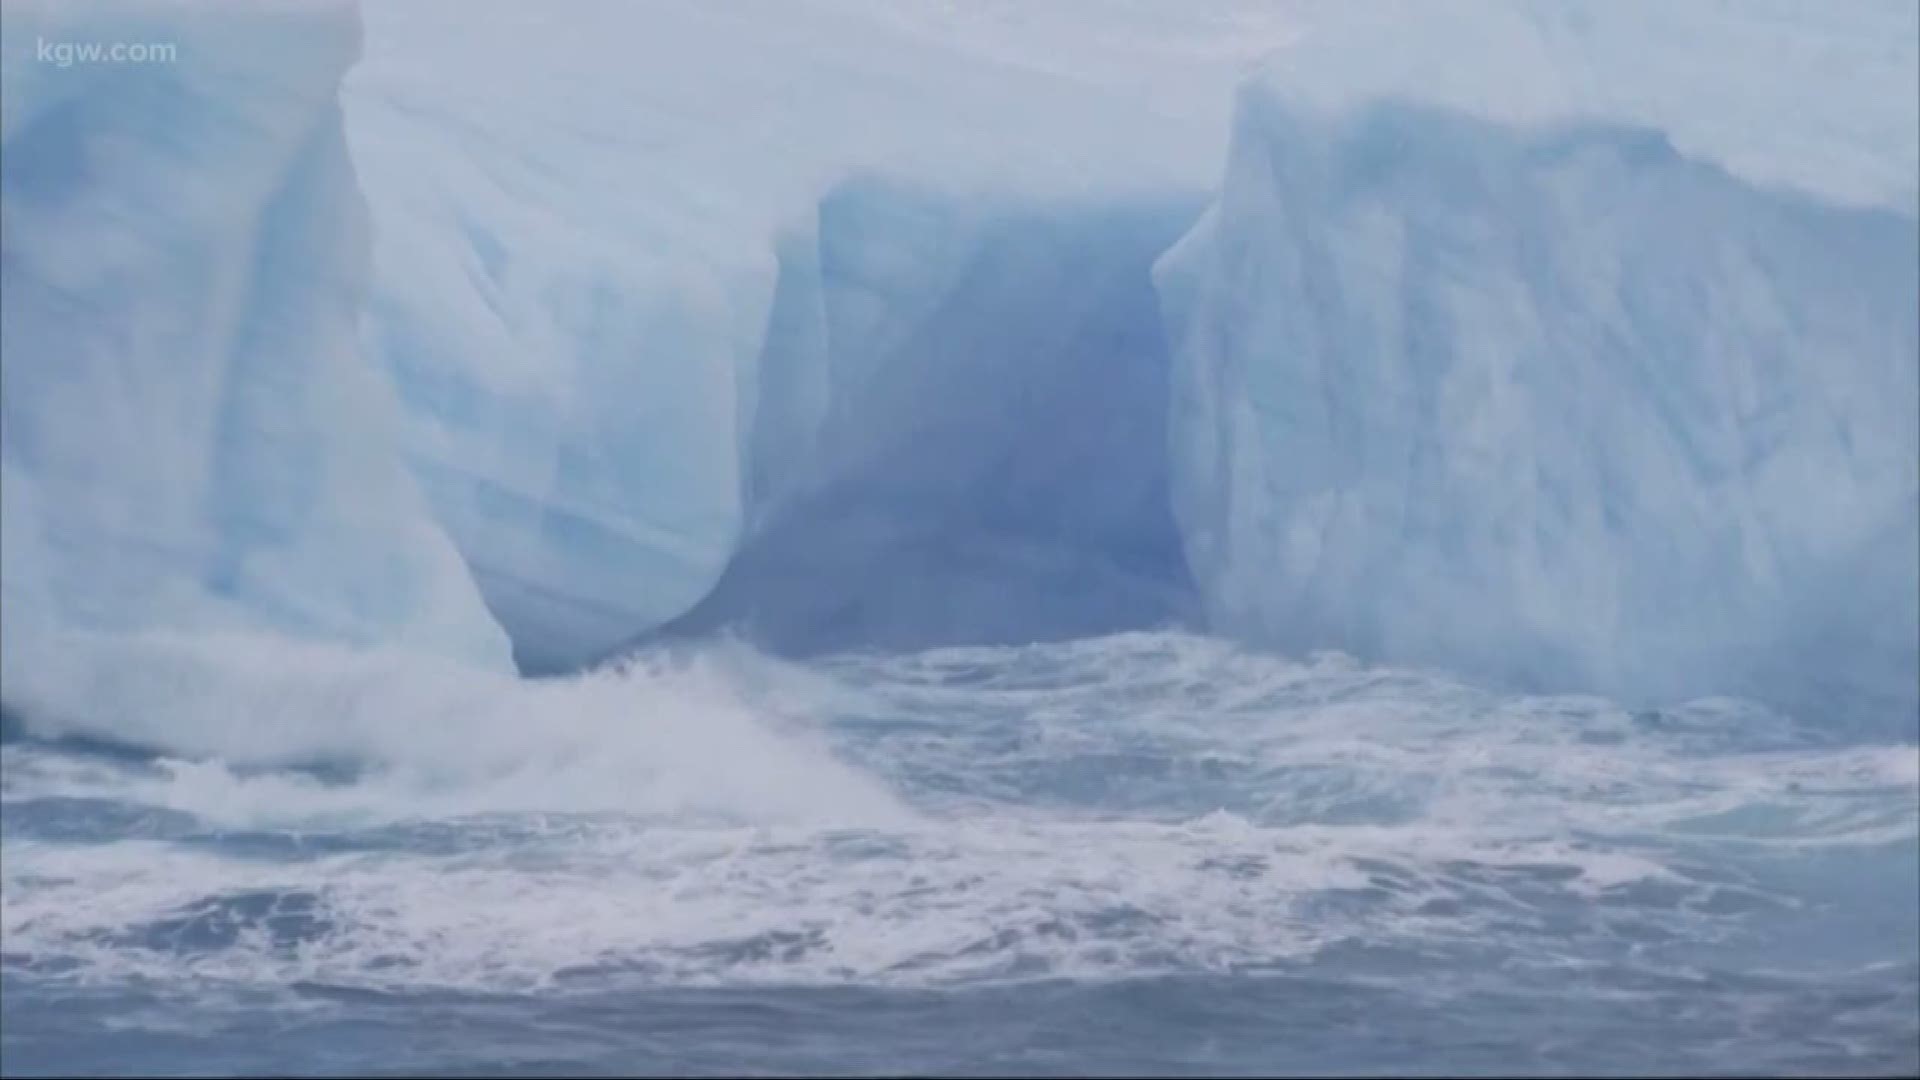 A study claims the warming climate is partly caused by melting icebergs.